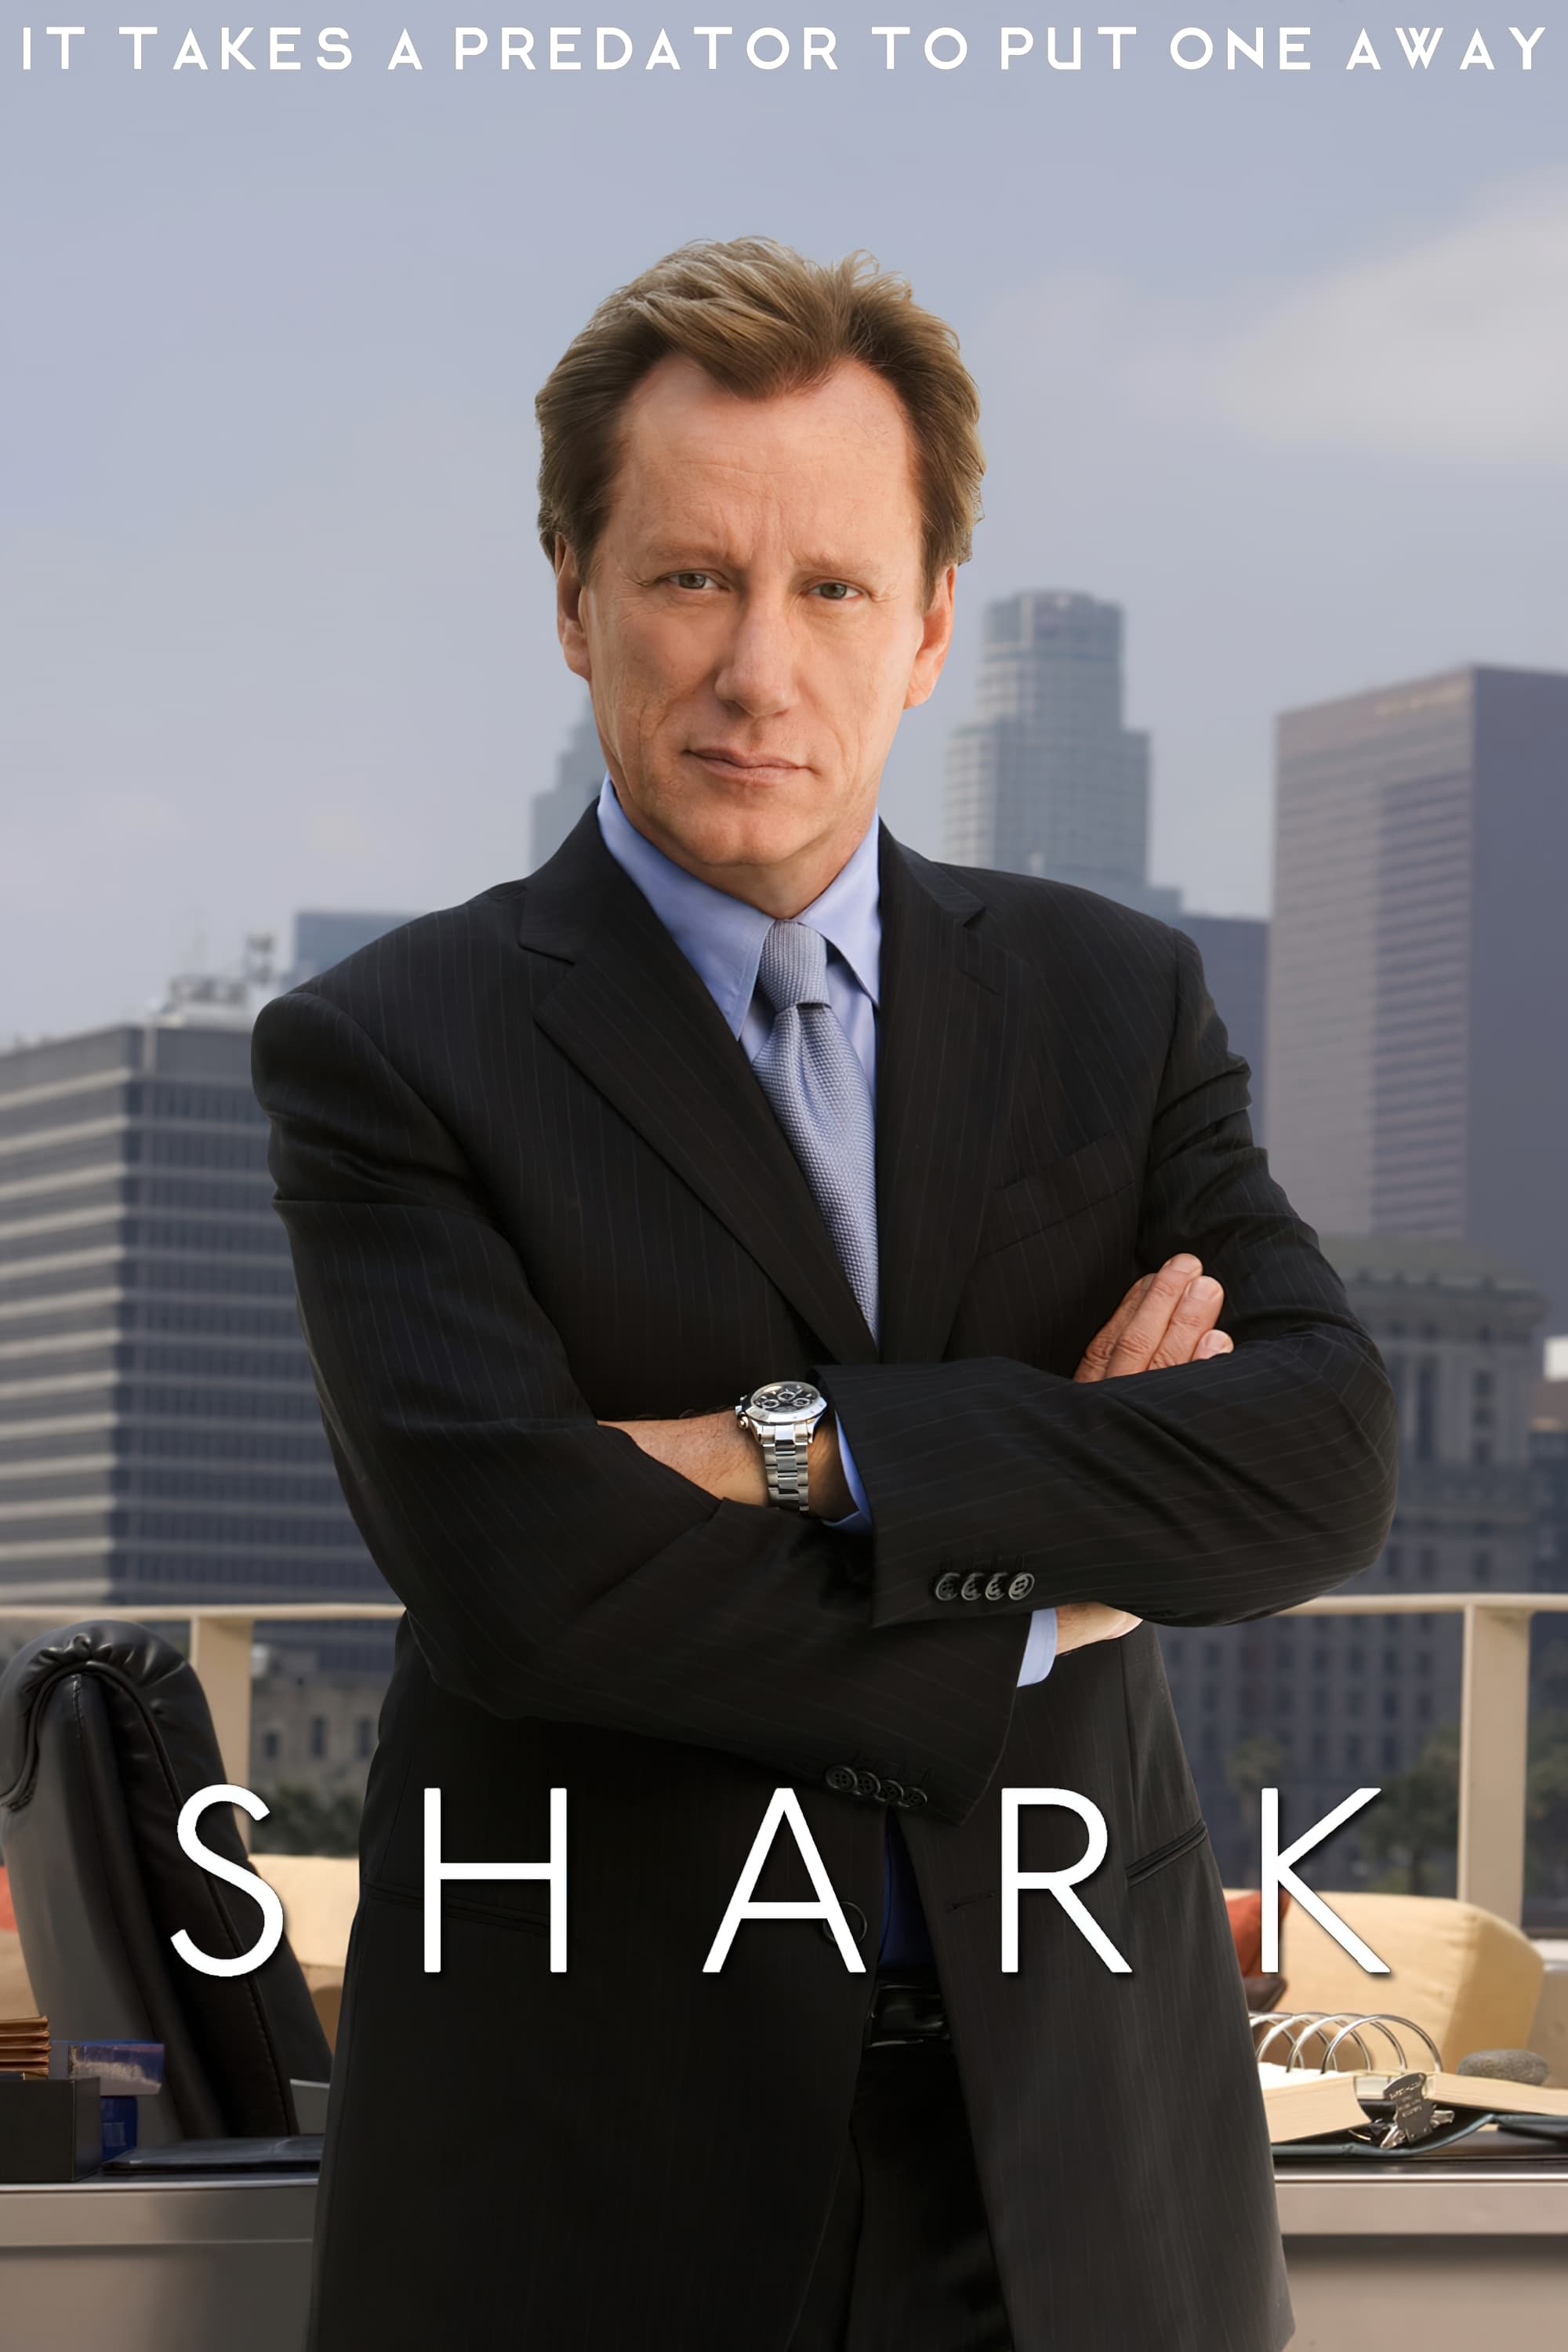 Shark TV Shows About Good Deed